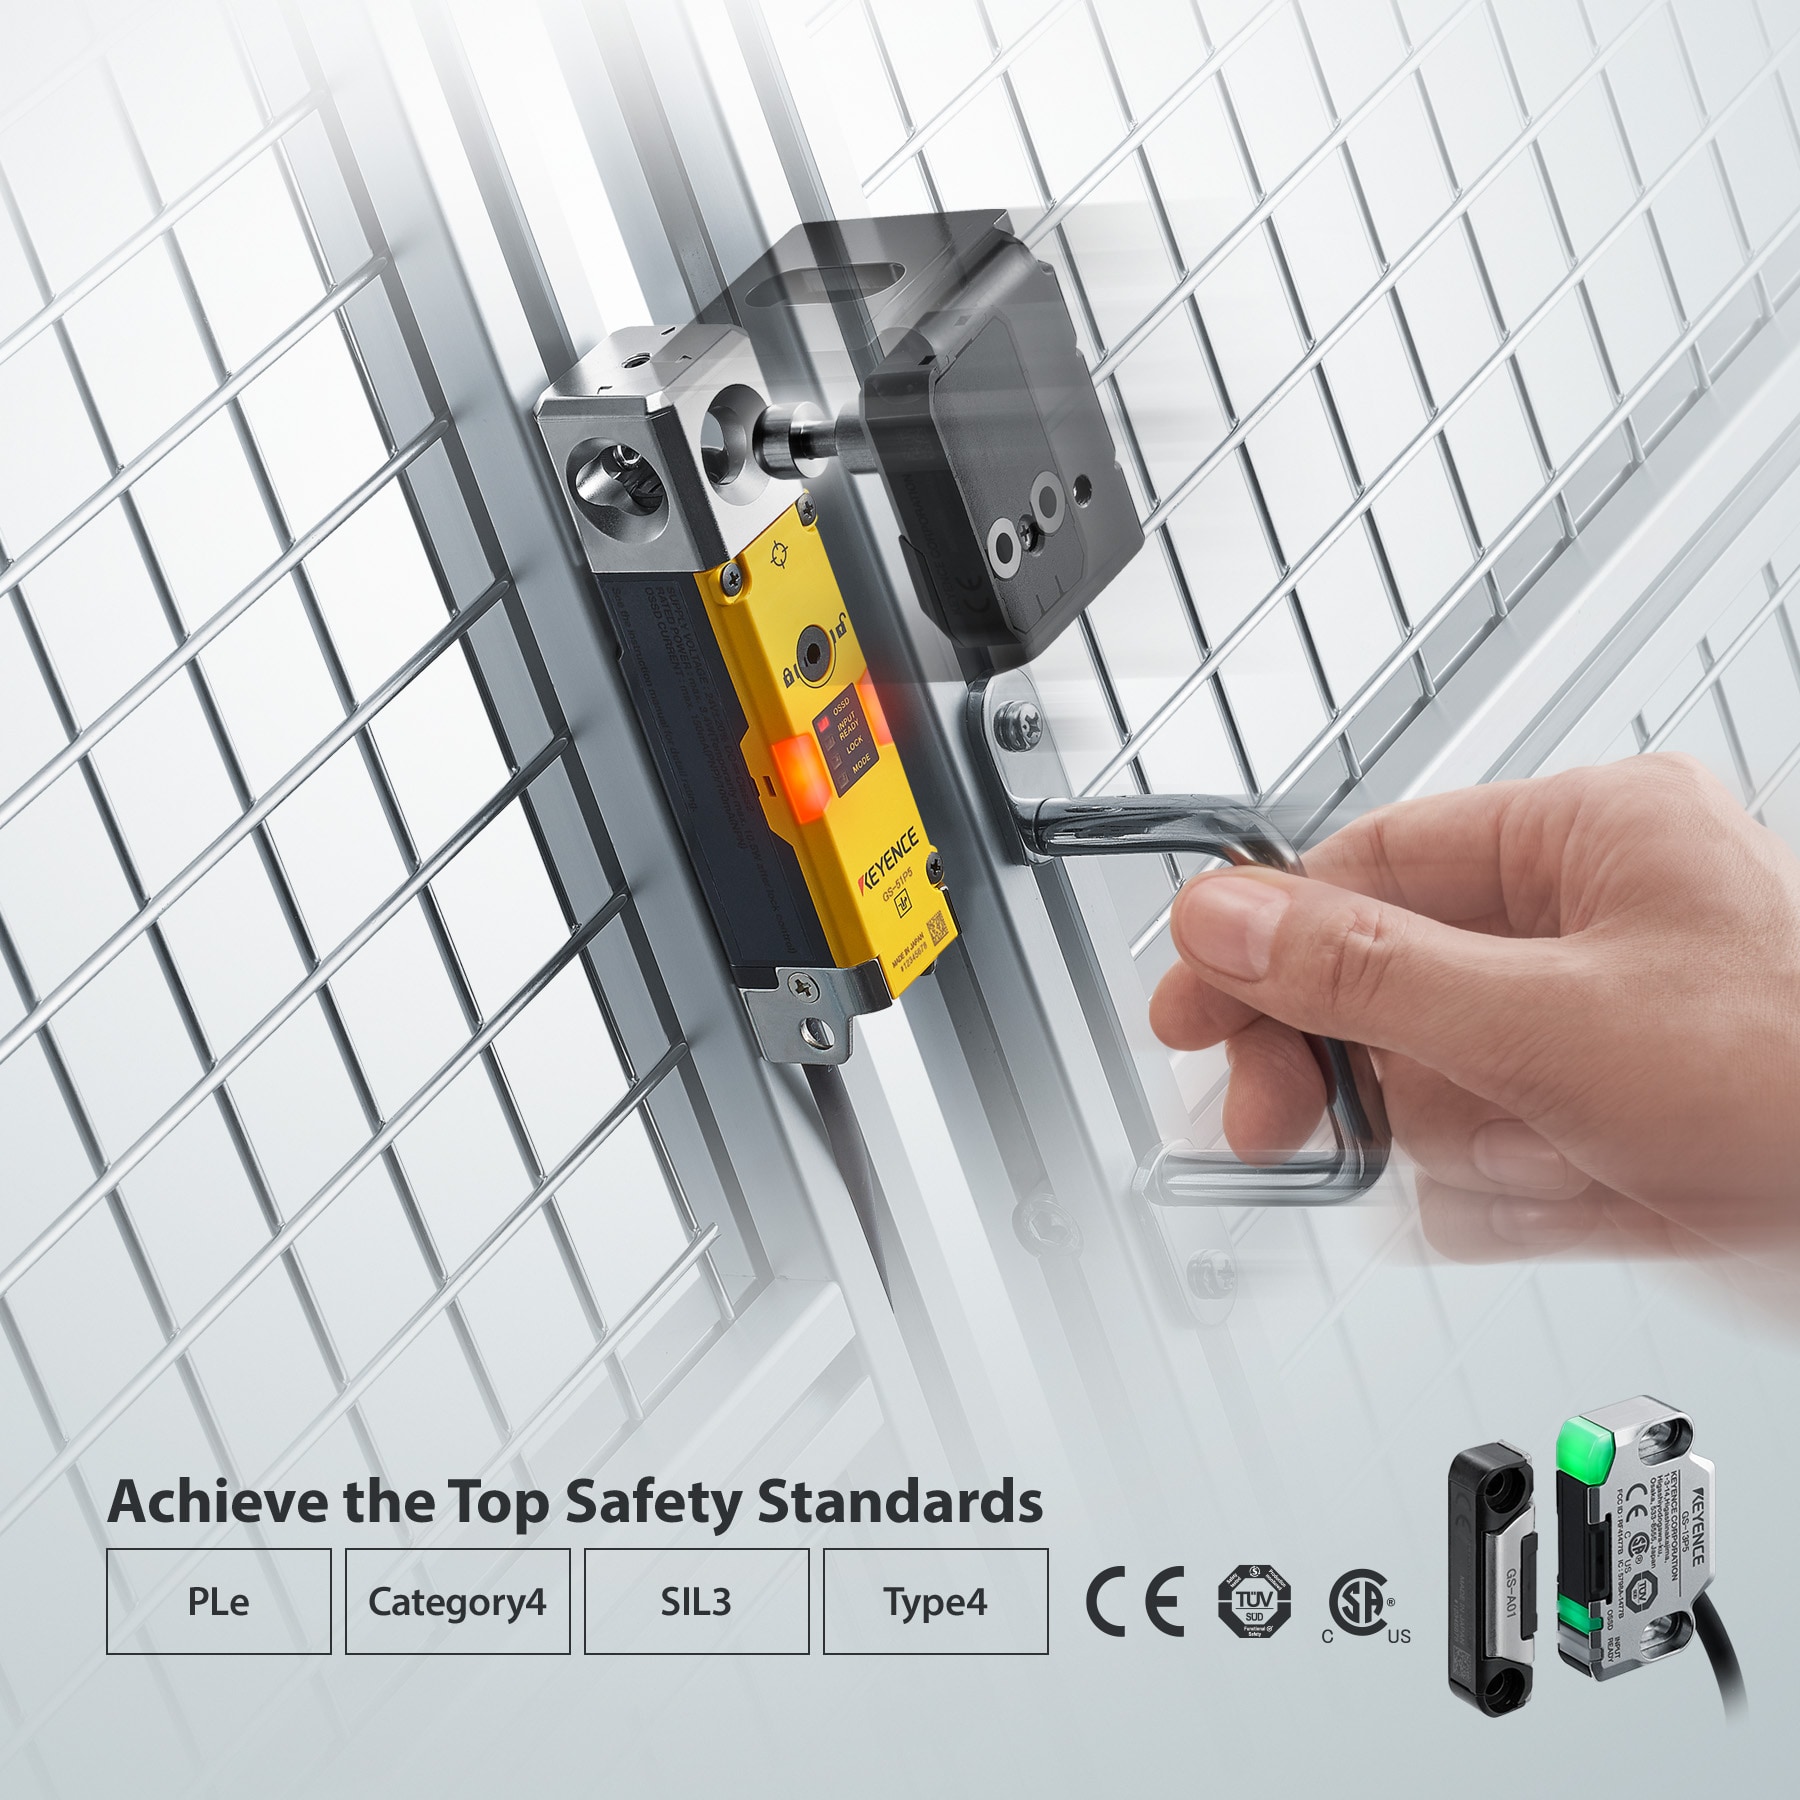 Achieve the Top Safety Standards. PLe / Category4 / SIL3 / Type4